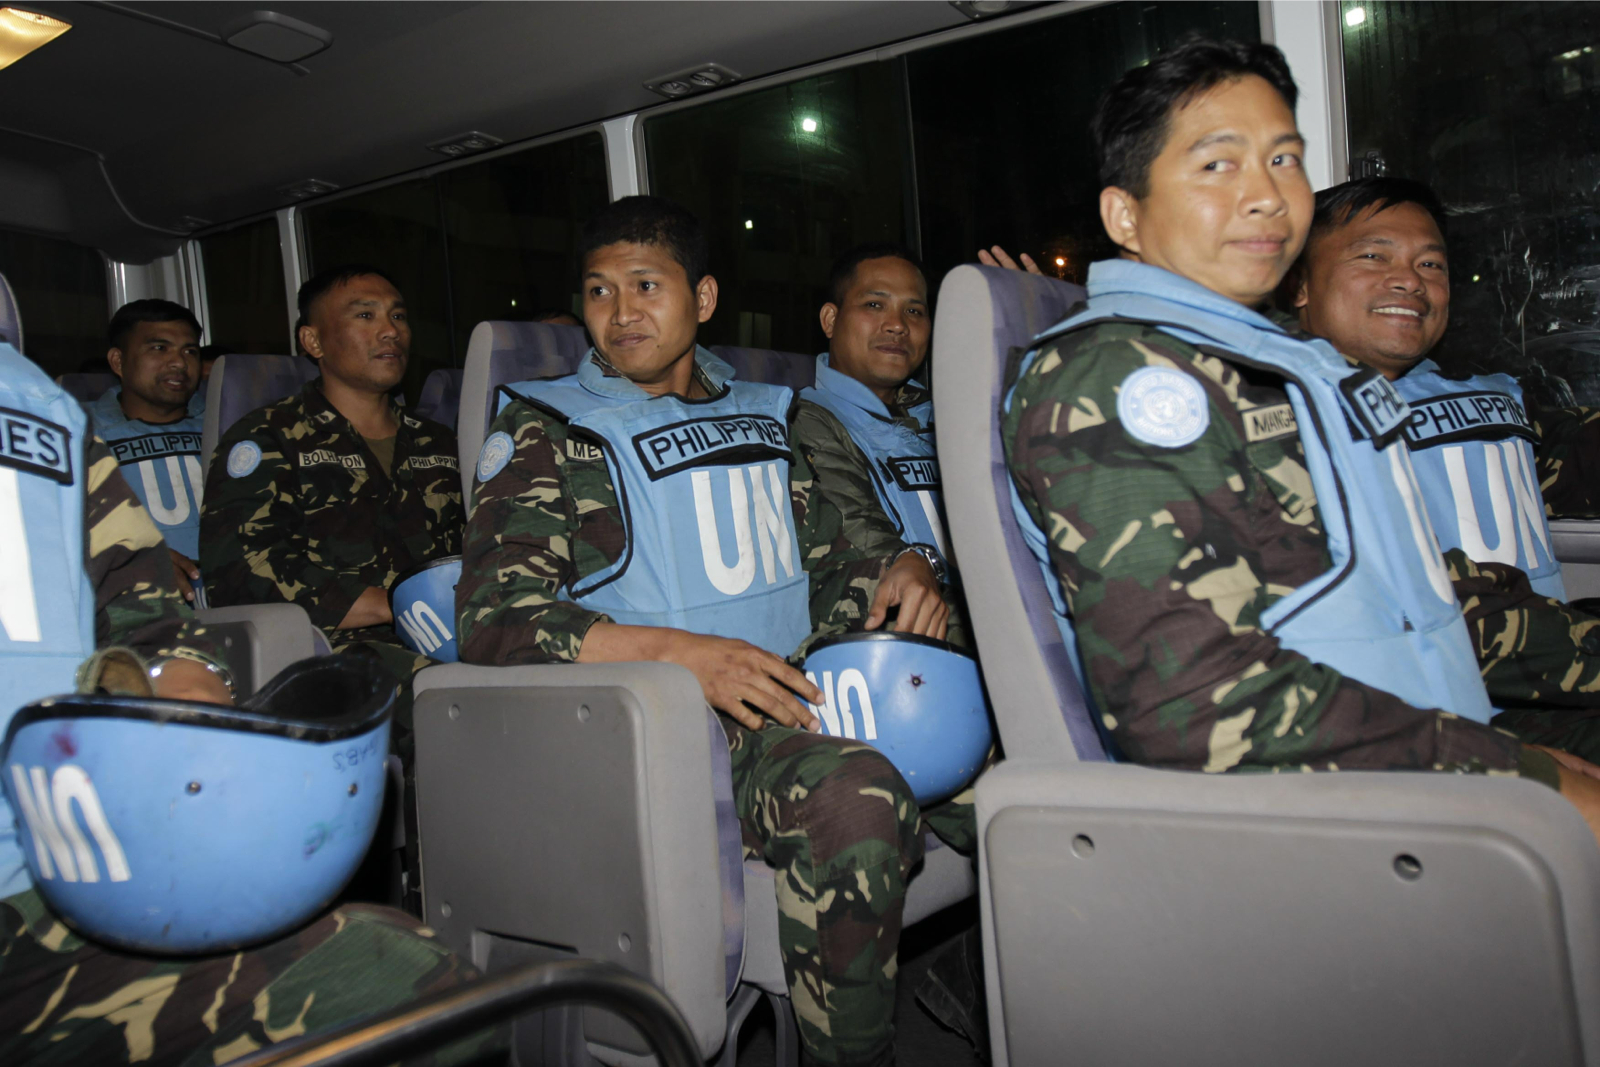 United Nations Filipino Peacekeepers Syria #InquirerSeven